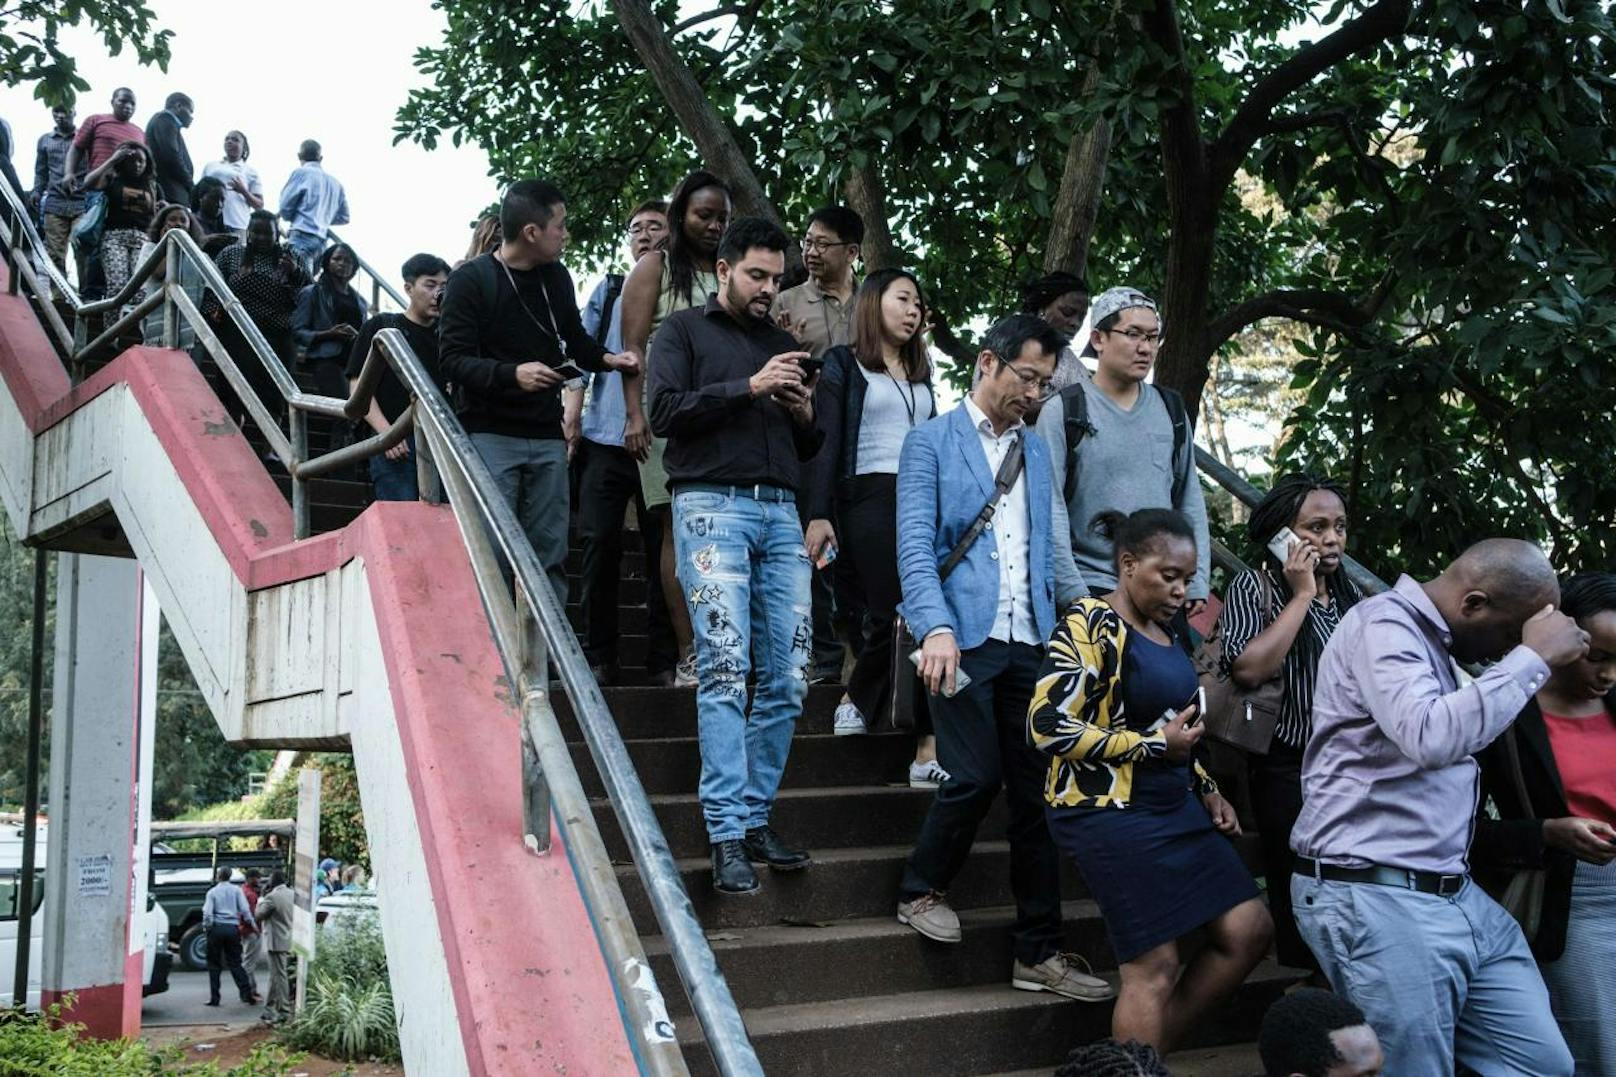 Download von www.picturedesk.com am 16.01.2019 (06:05). 
People are evacuated from DusitD2 compound in Nairobi after a blast followed by a gun battle rocked the upmarket hotel complex on January 15, 2019. - At least five people were killed on January 15 when an Islamist suicide bomber and gunmen stormed an upmarket hotel complex in Nairobi, in the first such attack in the Kenyan capital in five years. (Photo by Yasuyoshi CHIBA / AFP) - 20190115_PD8543 - Rechteinfo: Nur für redaktionelle Nutzung! - Editorial Use Only! Werbliche Nutzung nur nach Freigabe!